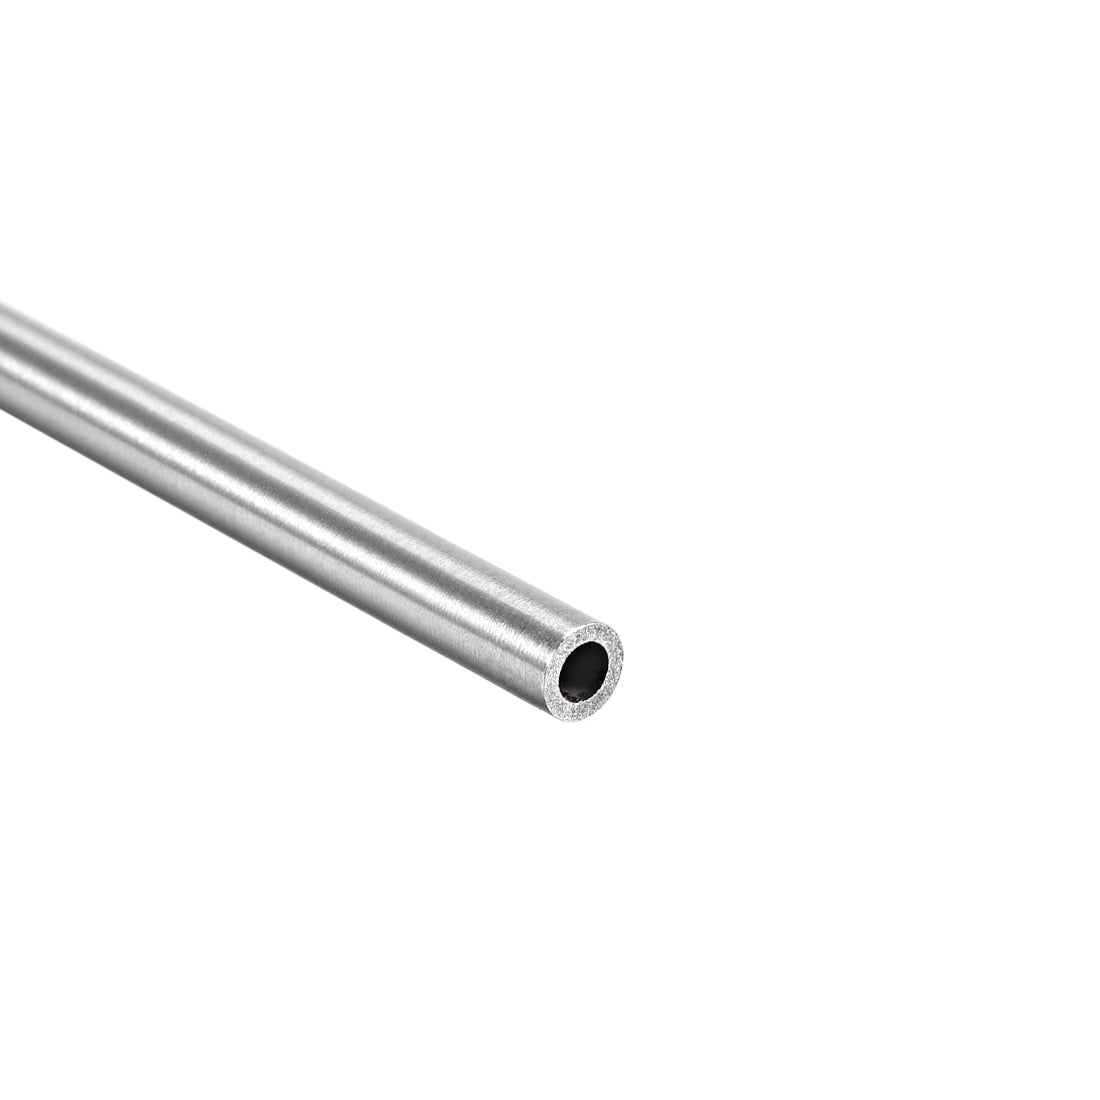 Uxcell Uxcell 304 Stainless Steel Round Tubing 5mm OD 1mm Wall Thickness 250mm Length Seamless Straight Pipe Tube